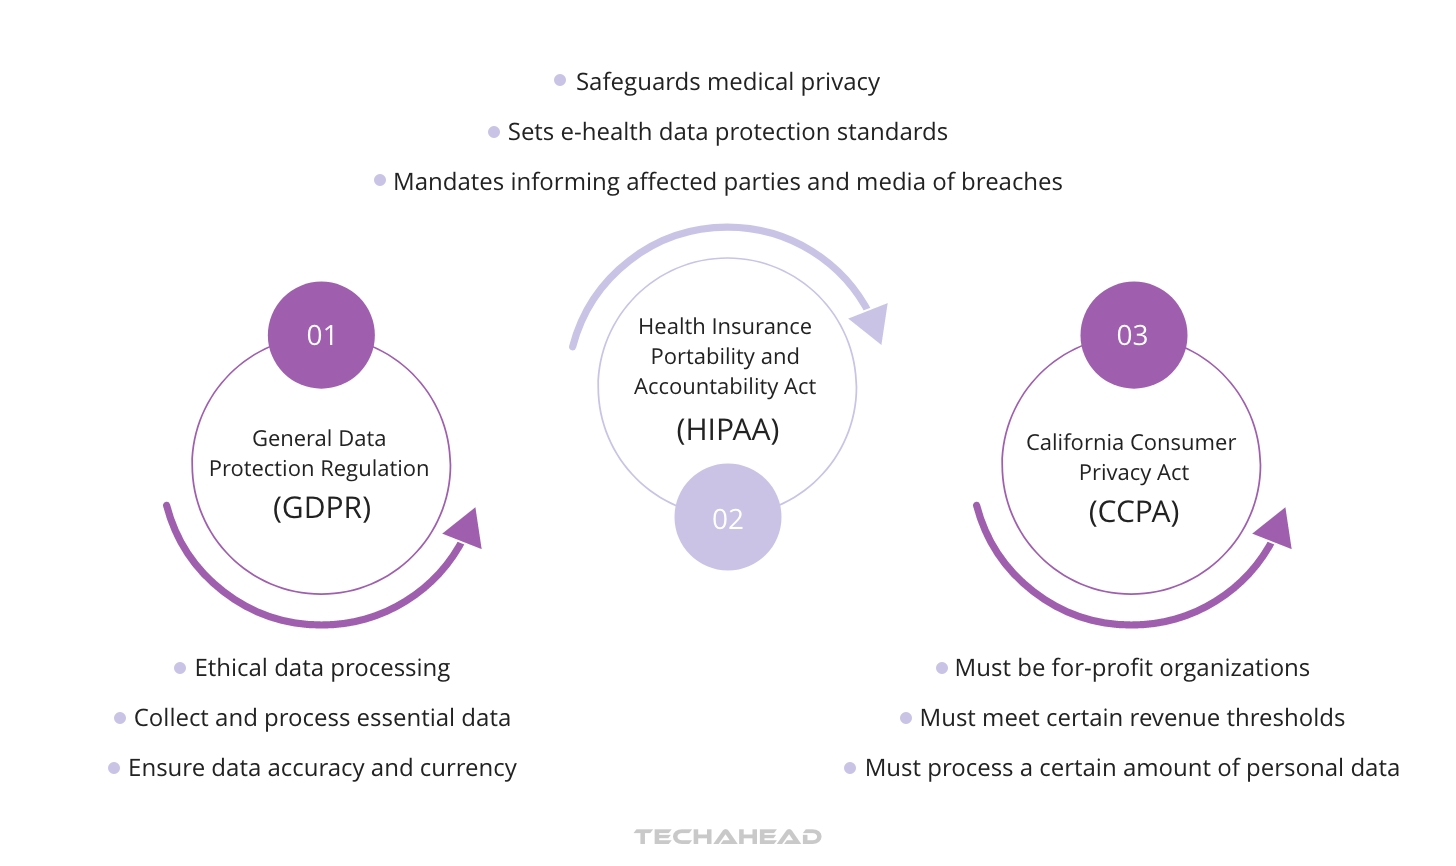 Healthcare regulations and data security